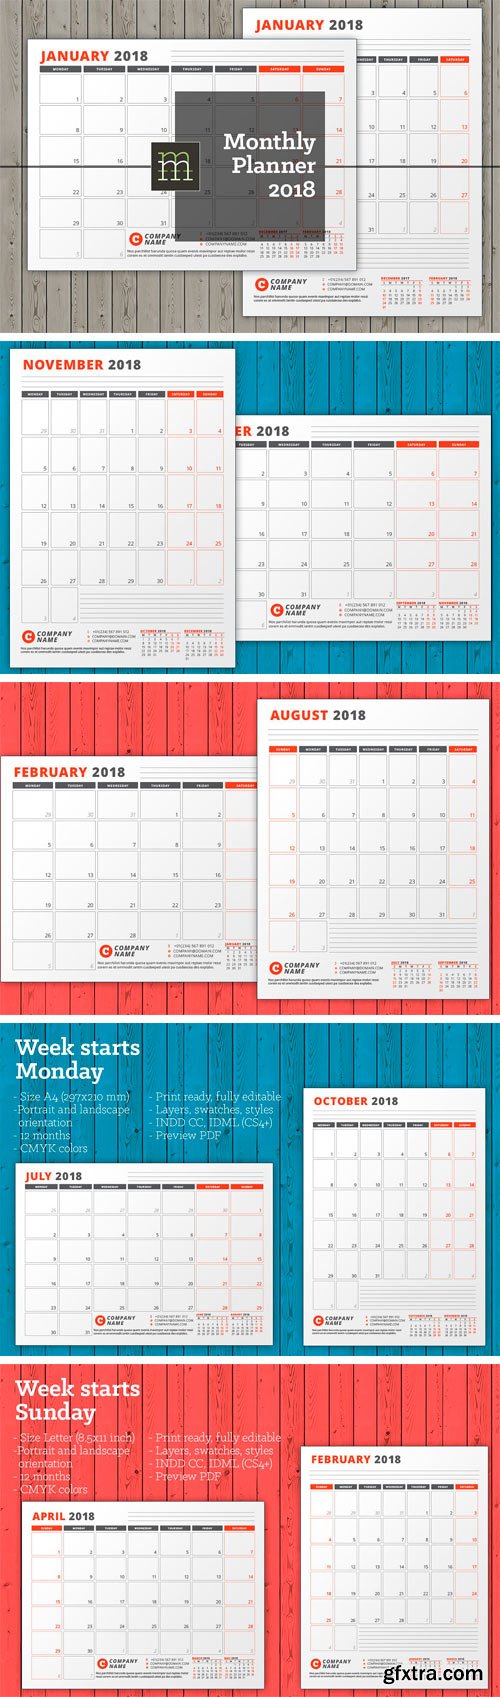 CM - Monthly Planner 2018 (MP14) 1683390